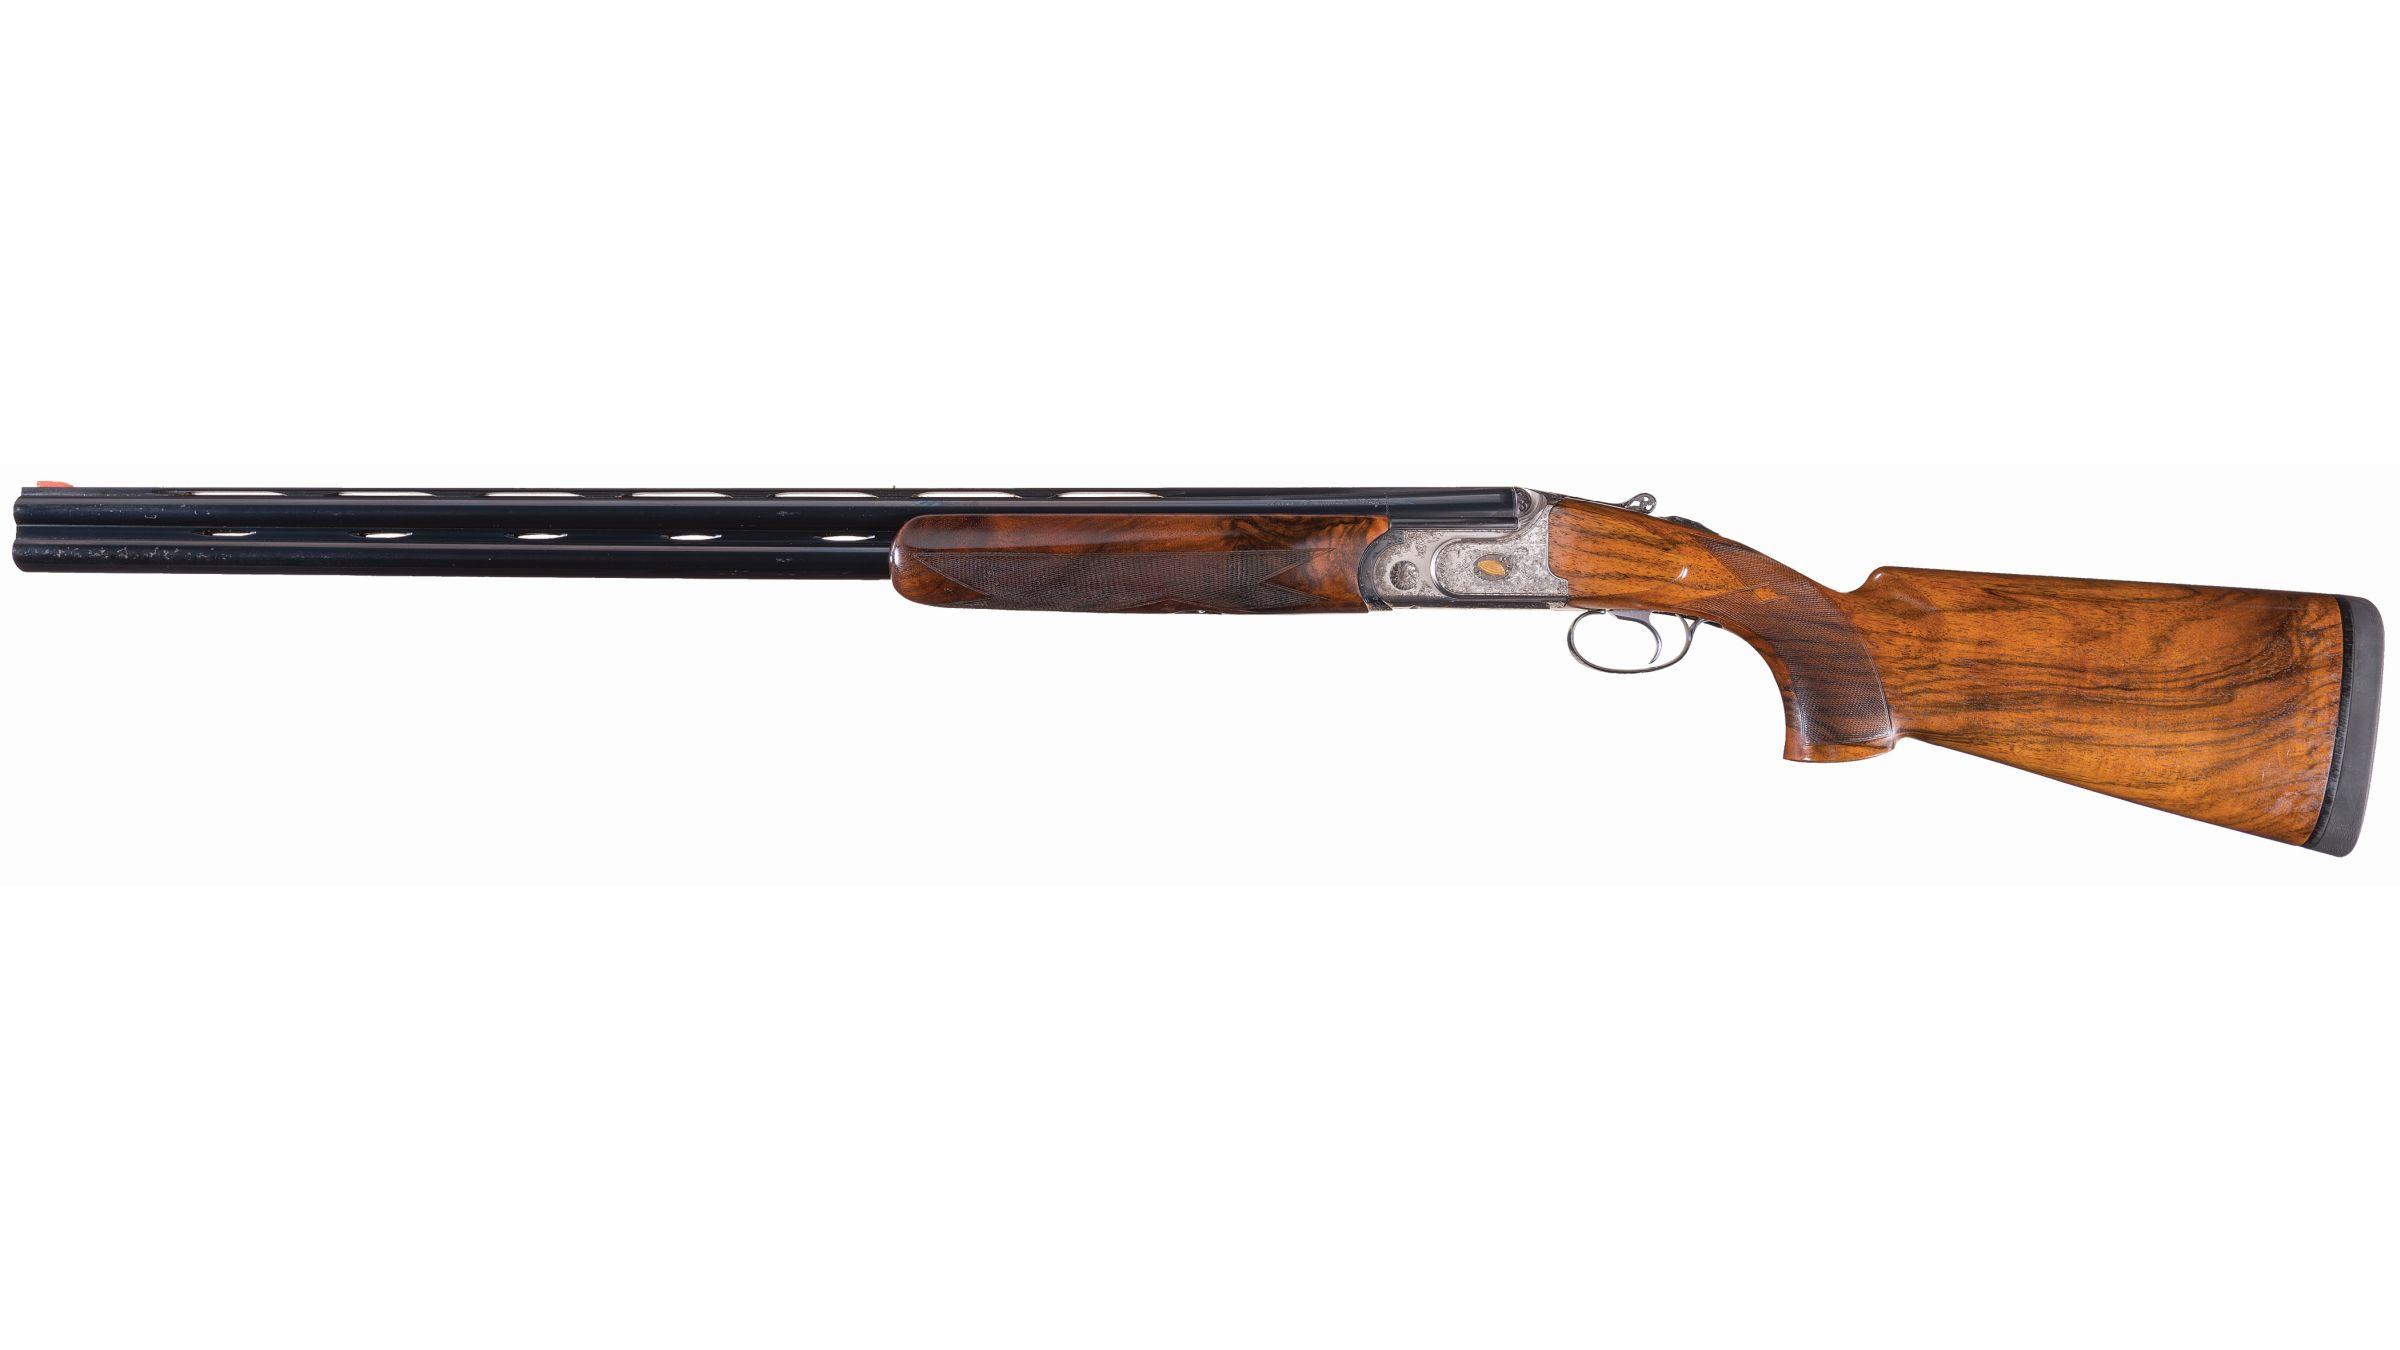 Engraved Gold Inlaid Rizzini S 790 EL Series Over/Under Shotgun